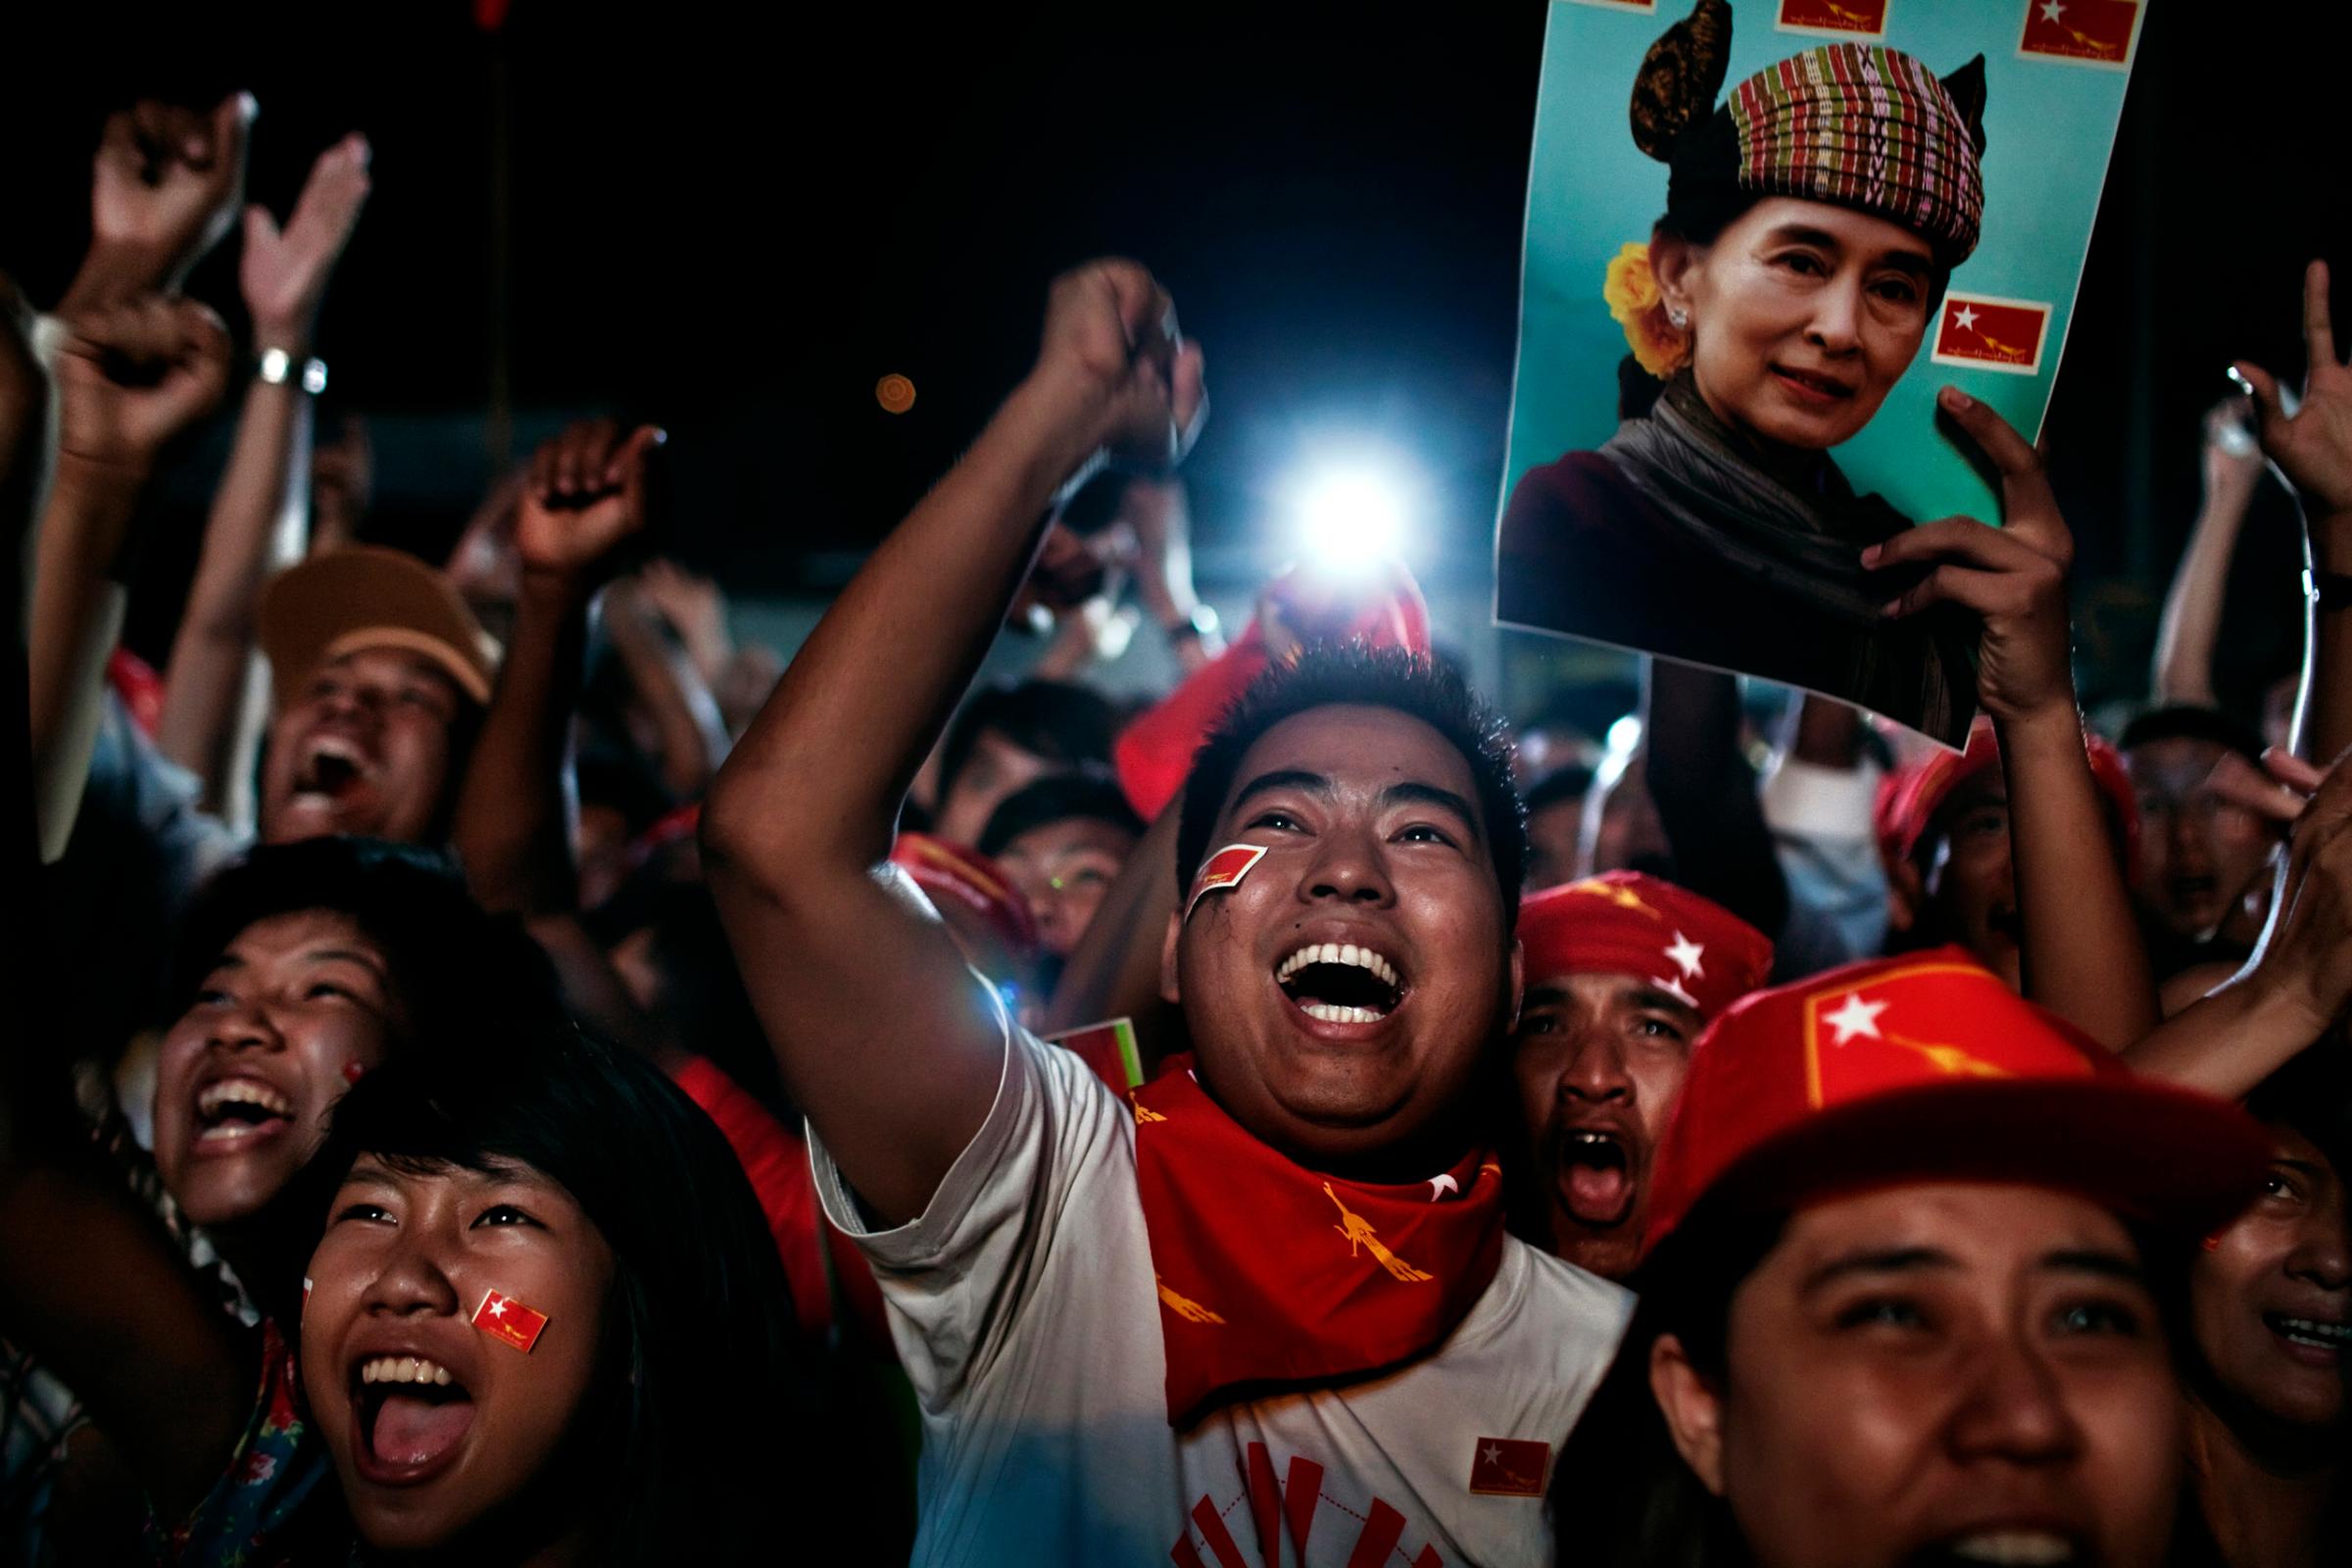 National League for Democracy (NLD) supporters celebrate at their headquarters as they watch election results Yangon, Burma, Apr. 1, 2012.